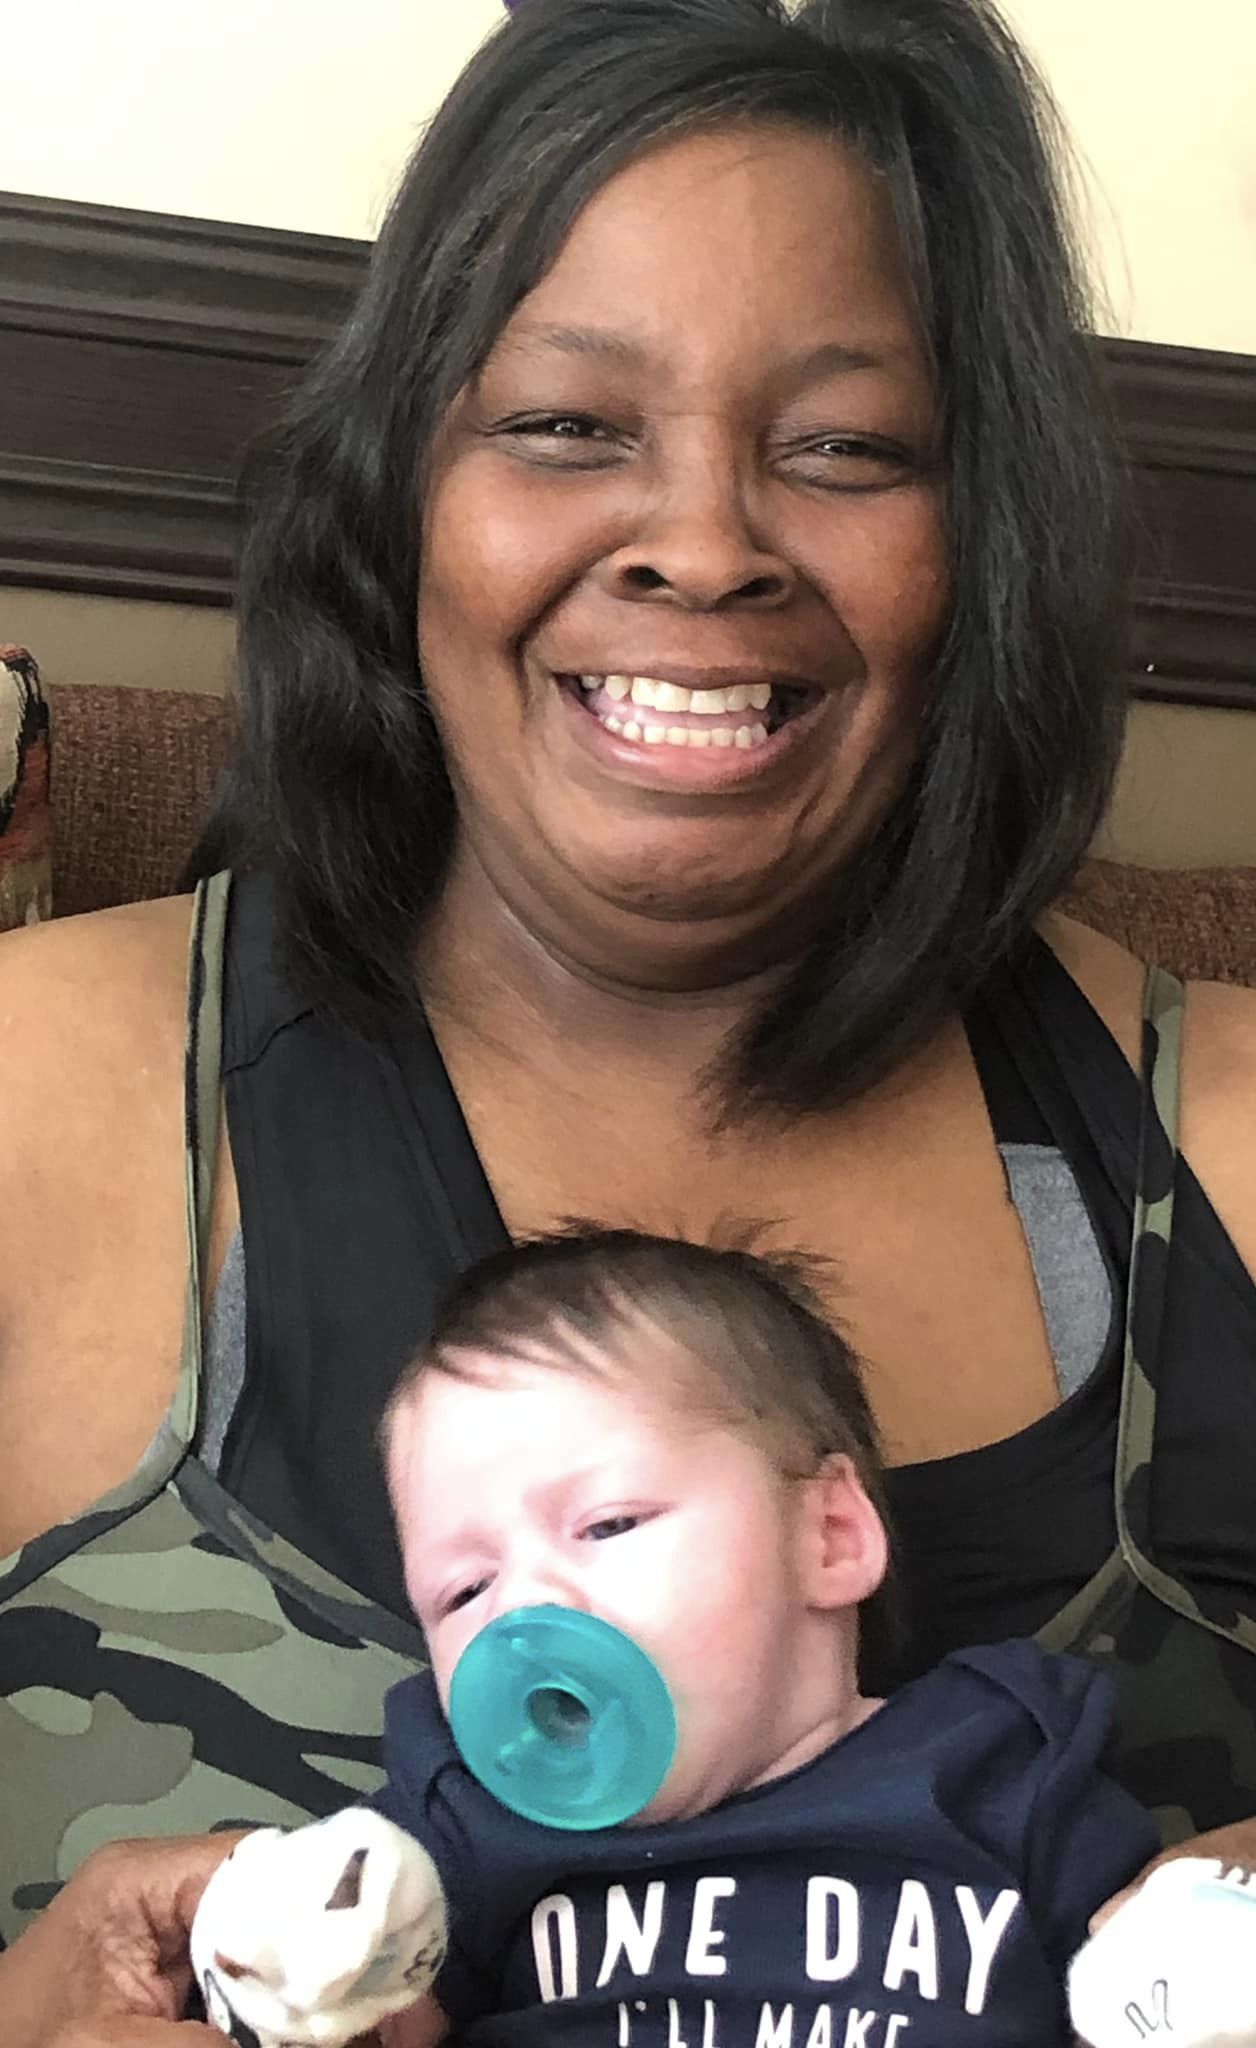 A woman smiles wide as she sits and holds a baby in her arms.